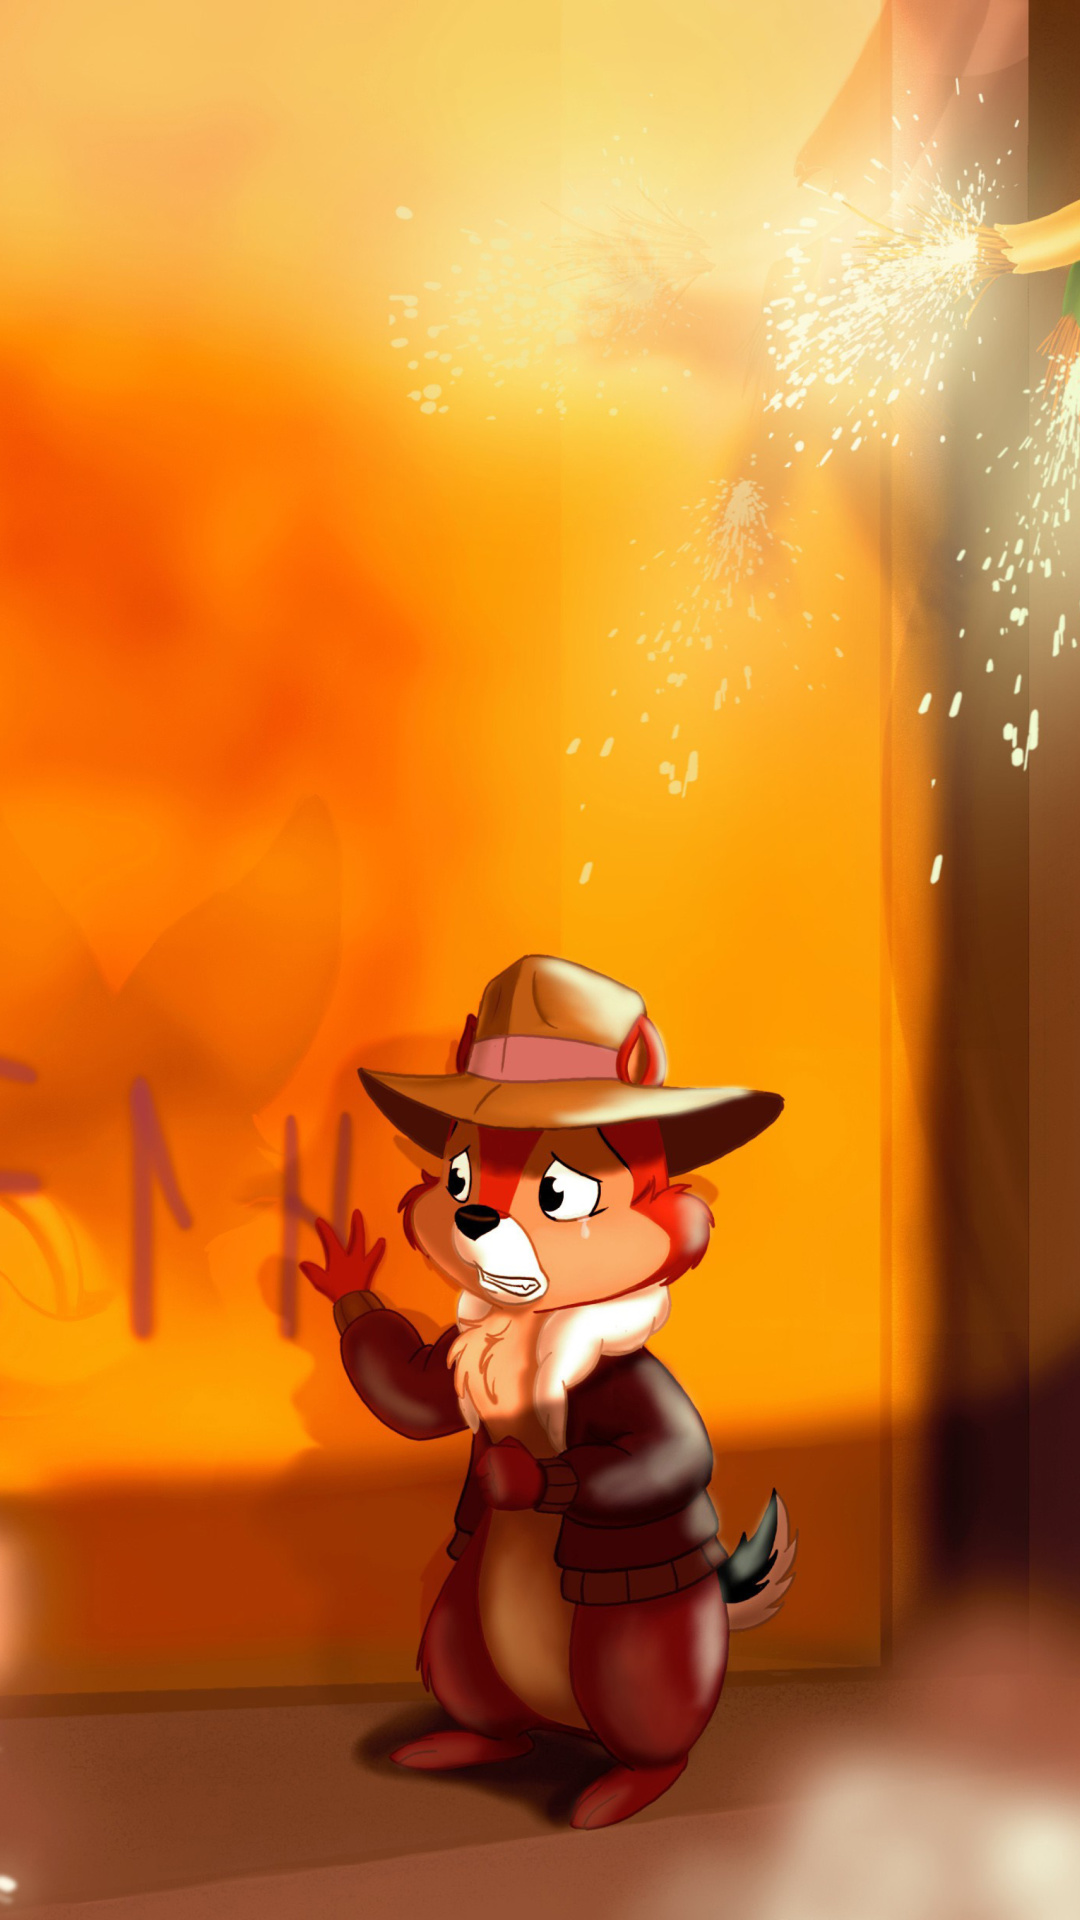 Chip and Dale Rescue Rangers 2 wallpaper 1080x1920